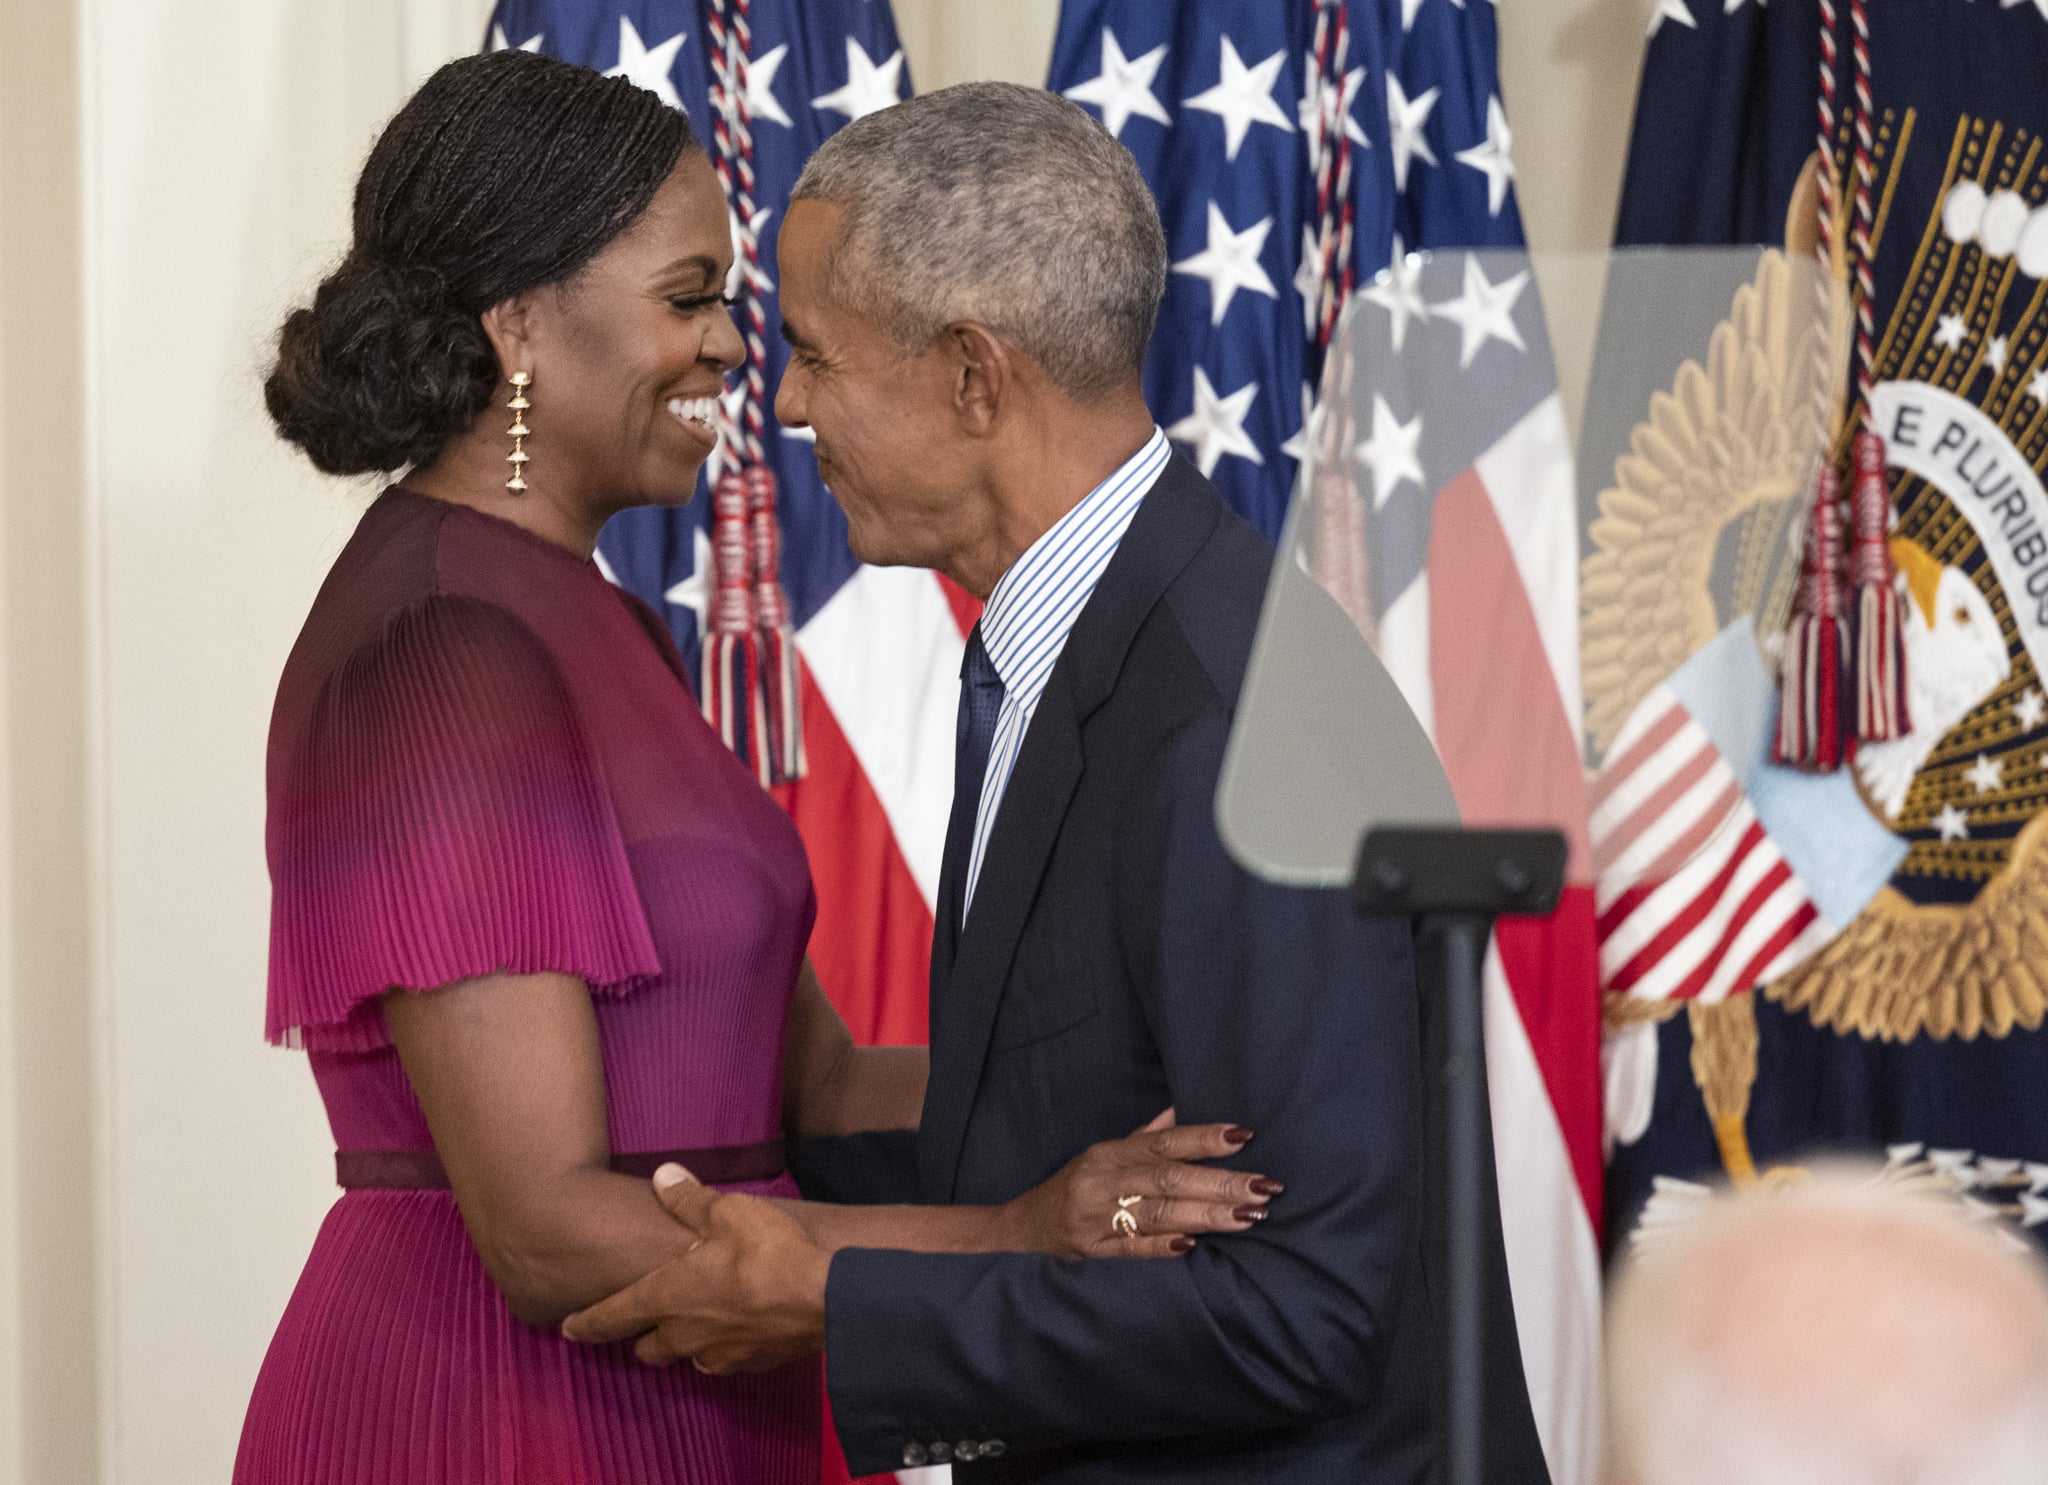 WASHINGTON, DC - SEPTEMBER 07: Former First Lady Michelle Obama and former U.S. President Barack Obama embrace at a ceremony to unveil their official White House portraits at the White House on September 7, 2022 in Washington, DC. The Obama's portraits will be the first official portraits added to the White House Collection since President Obama held an unveiling ceremony for George W. Bush and Laura Bush in 2012. (Photo by Kevin Dietsch/Getty Images)